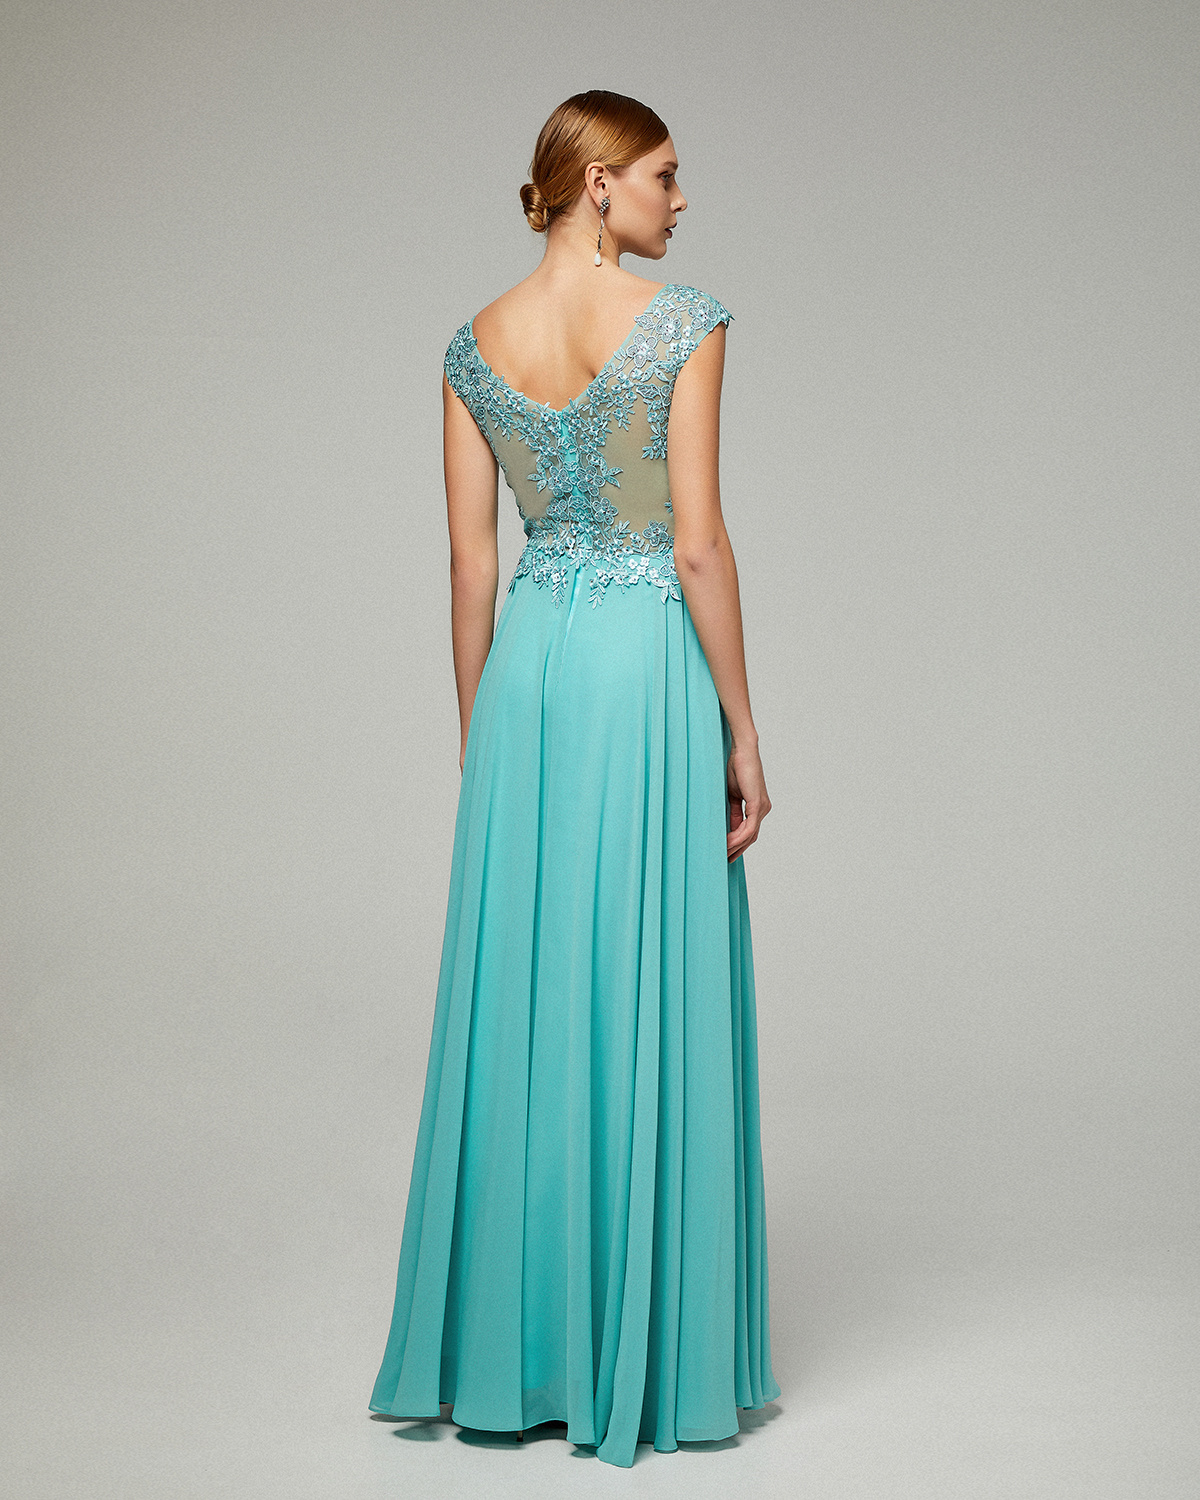 Classic Dresses / Long dress with chiffon fabric, beaded top with lace